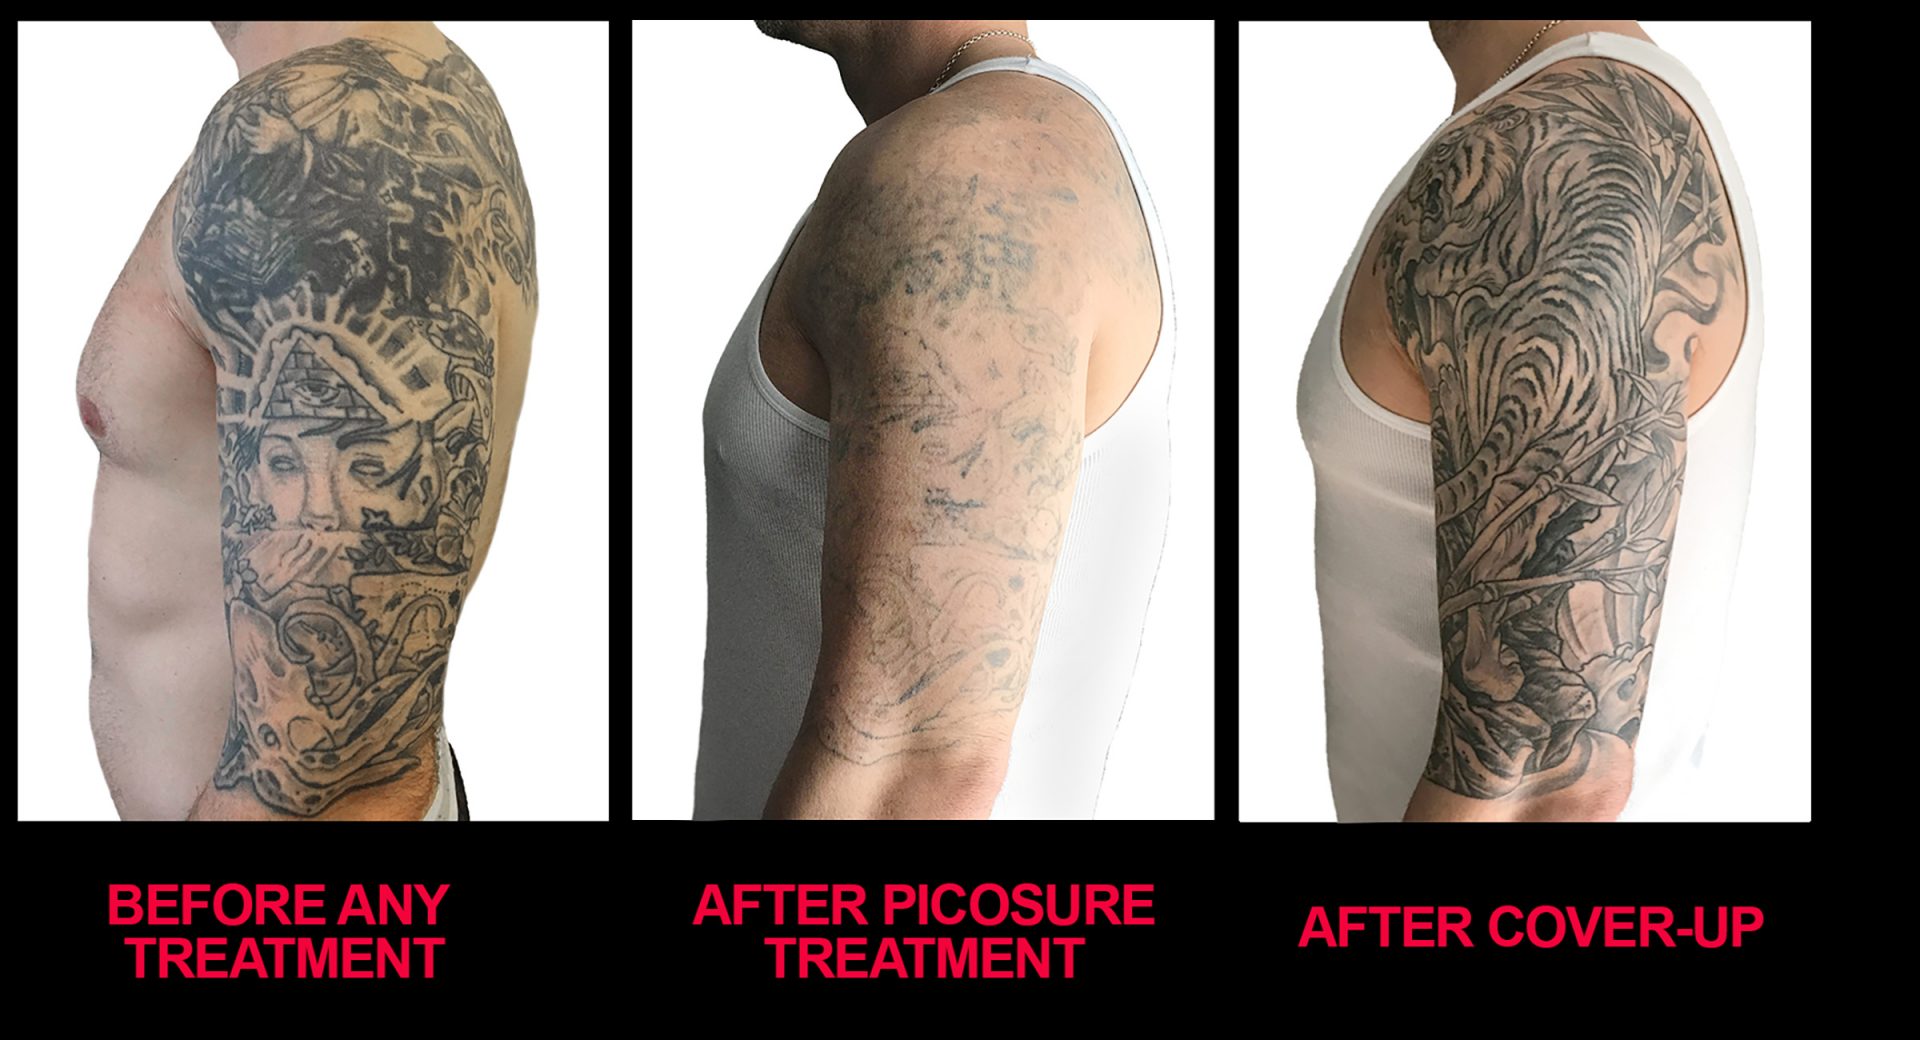 Laser tattoo removal or cover up